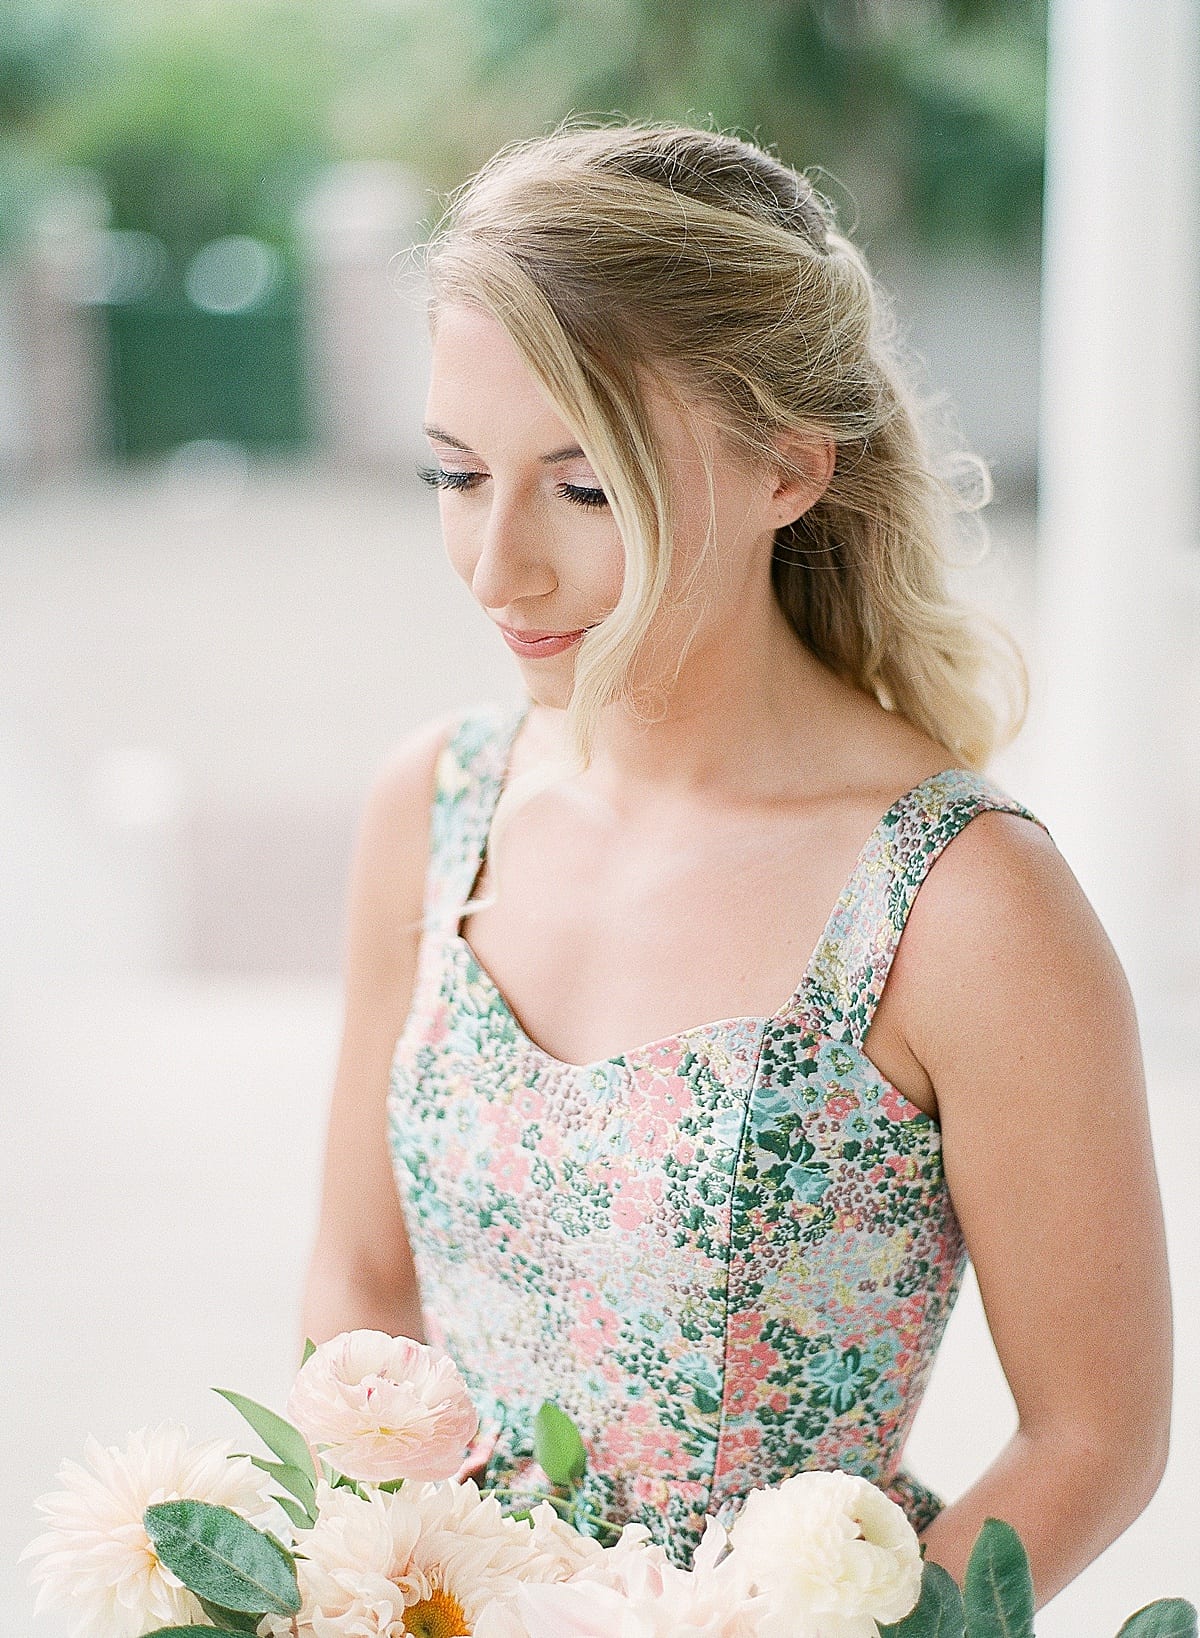 Woman Looking Down Holding Flowers Photo